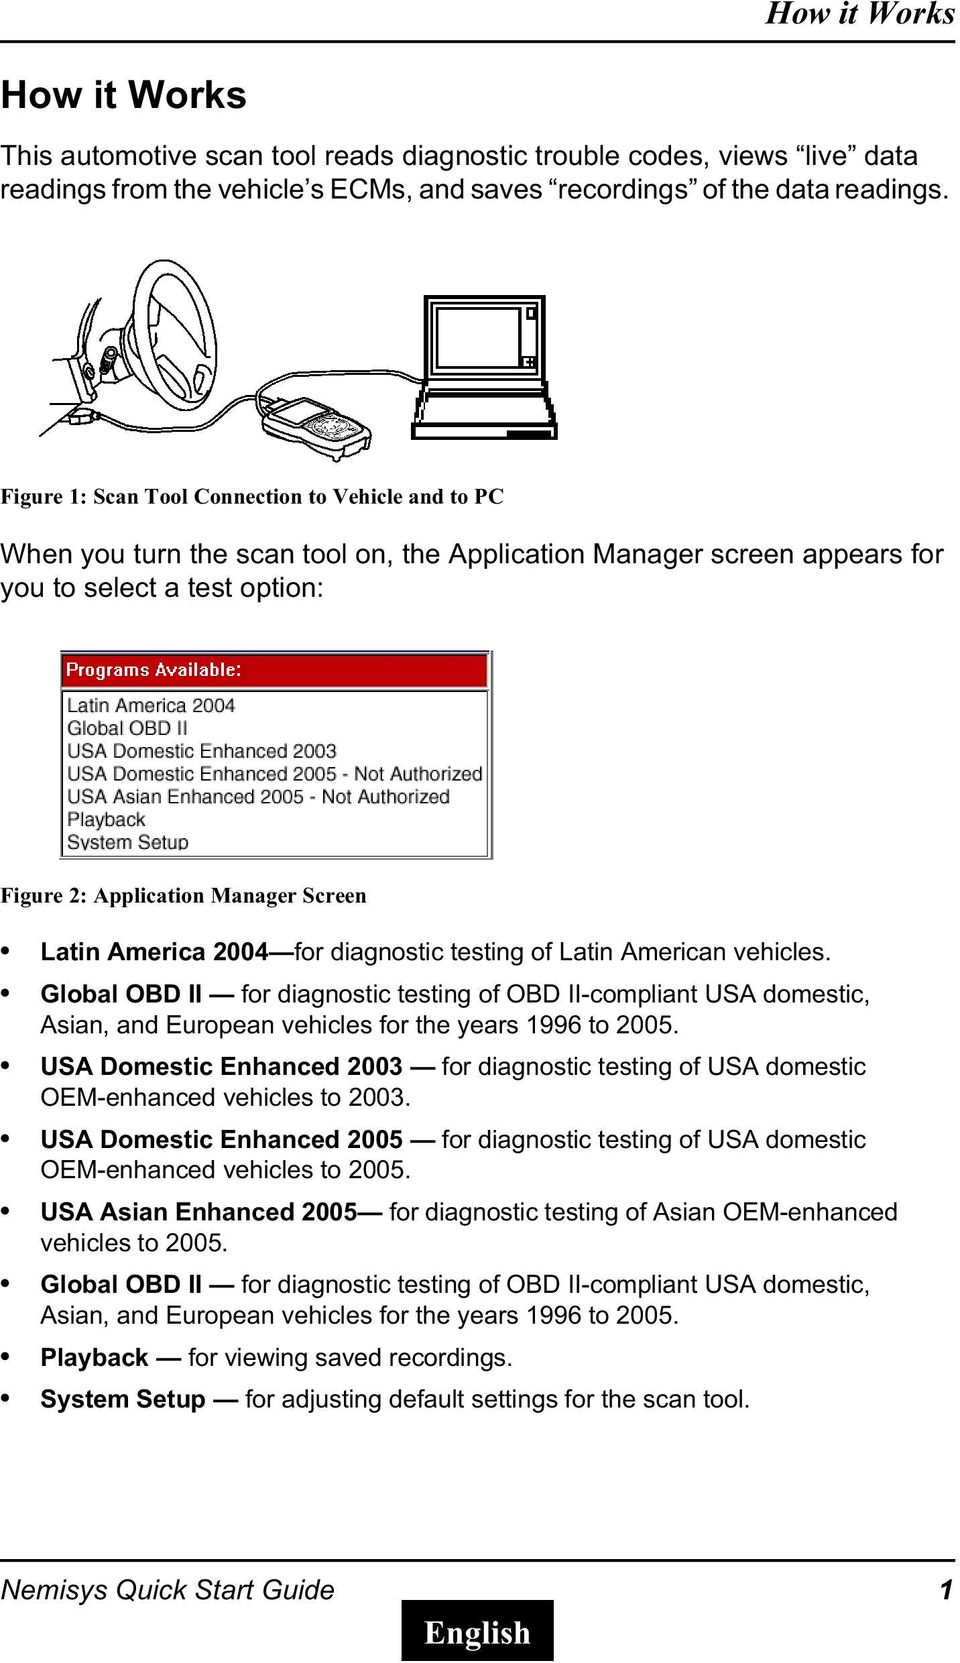 America 2004 for diagnostic testing of Latin American vehicles. Global OBD II for diagnostic testing of OBD II-compliant USA domestic, Asian, and European vehicles for the years 1996 to 2005.